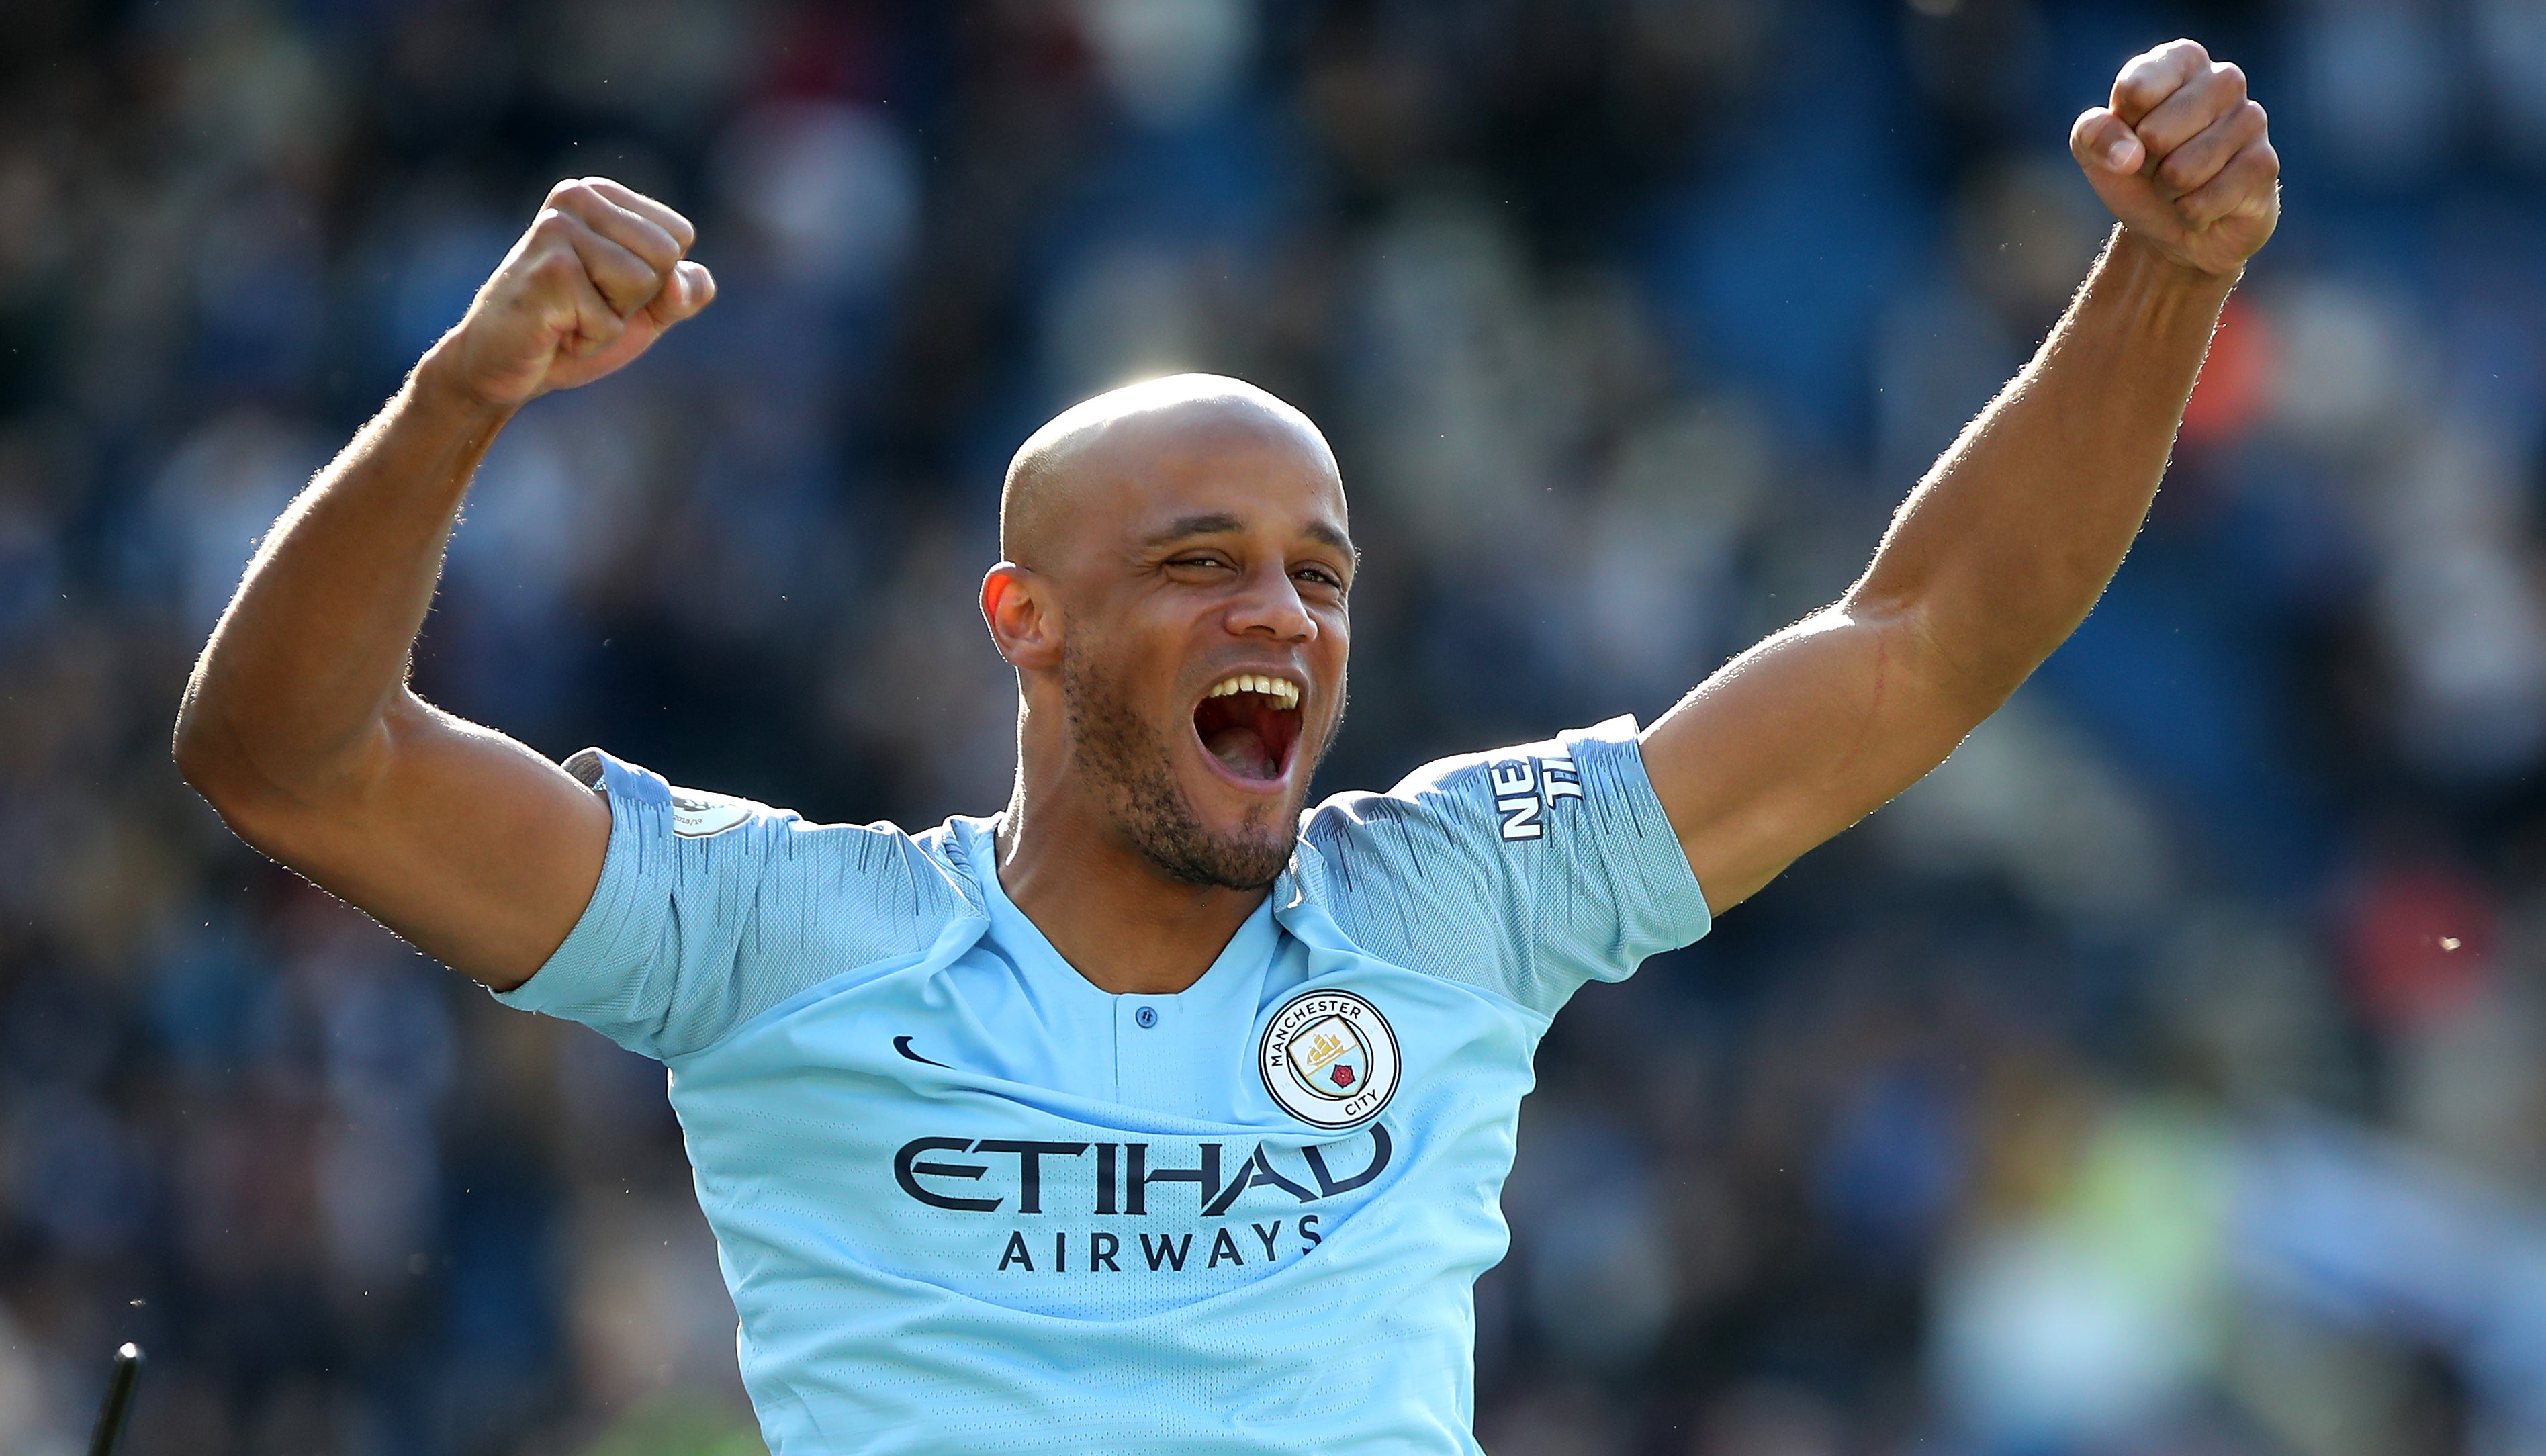 Defender Kompany won 10 major trophies with the club, including four Premier League titles